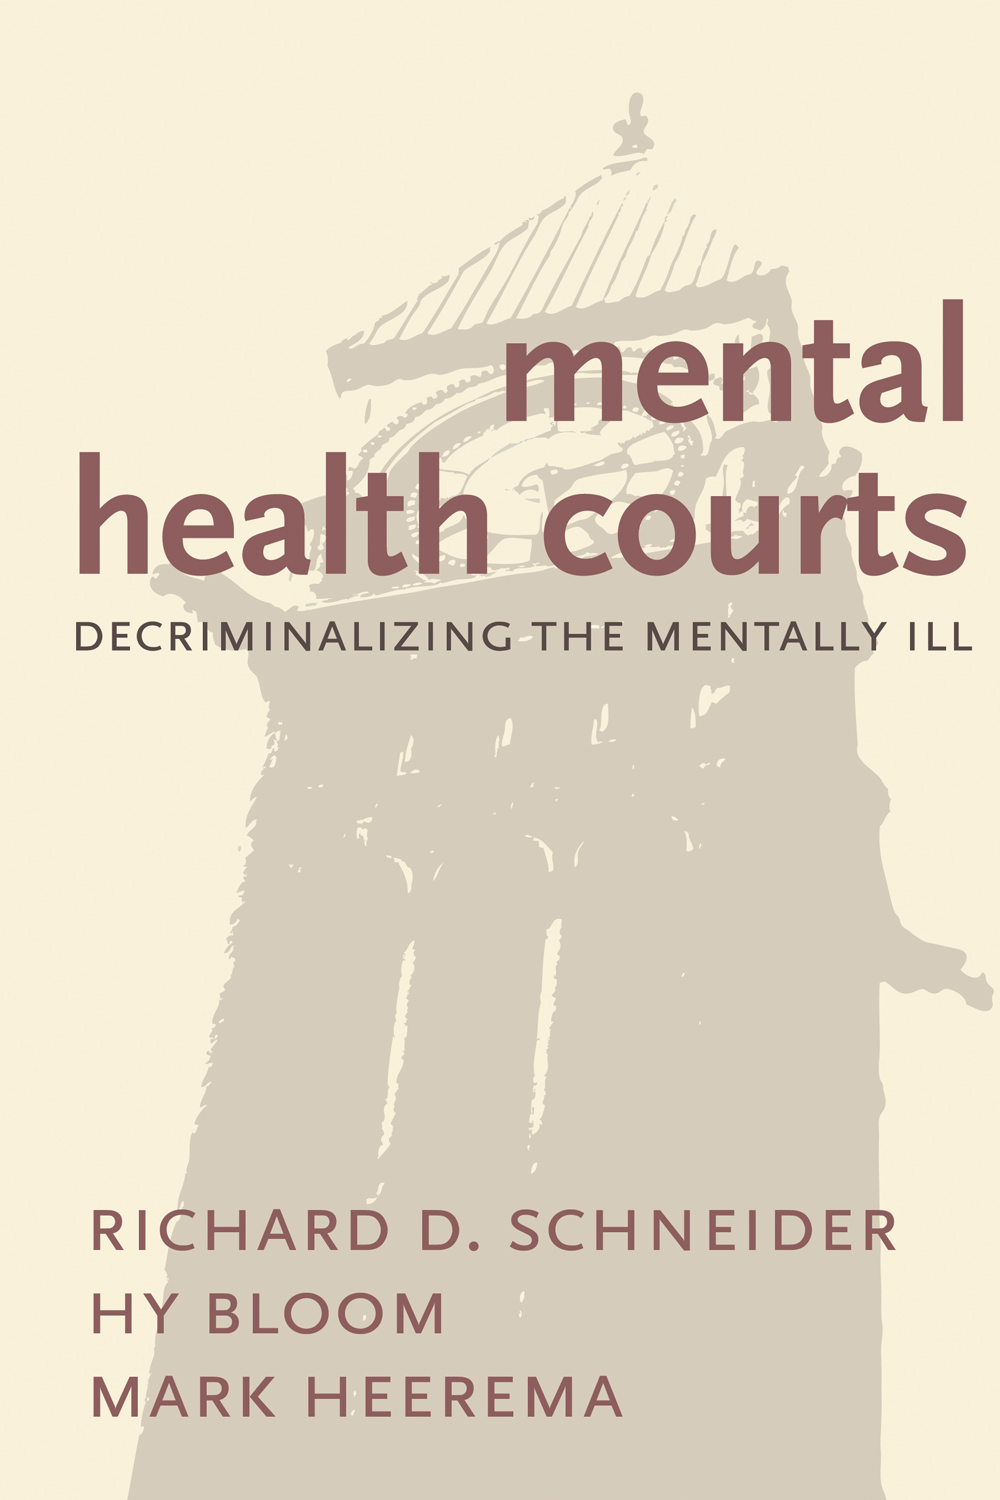 literature review on mental health courts